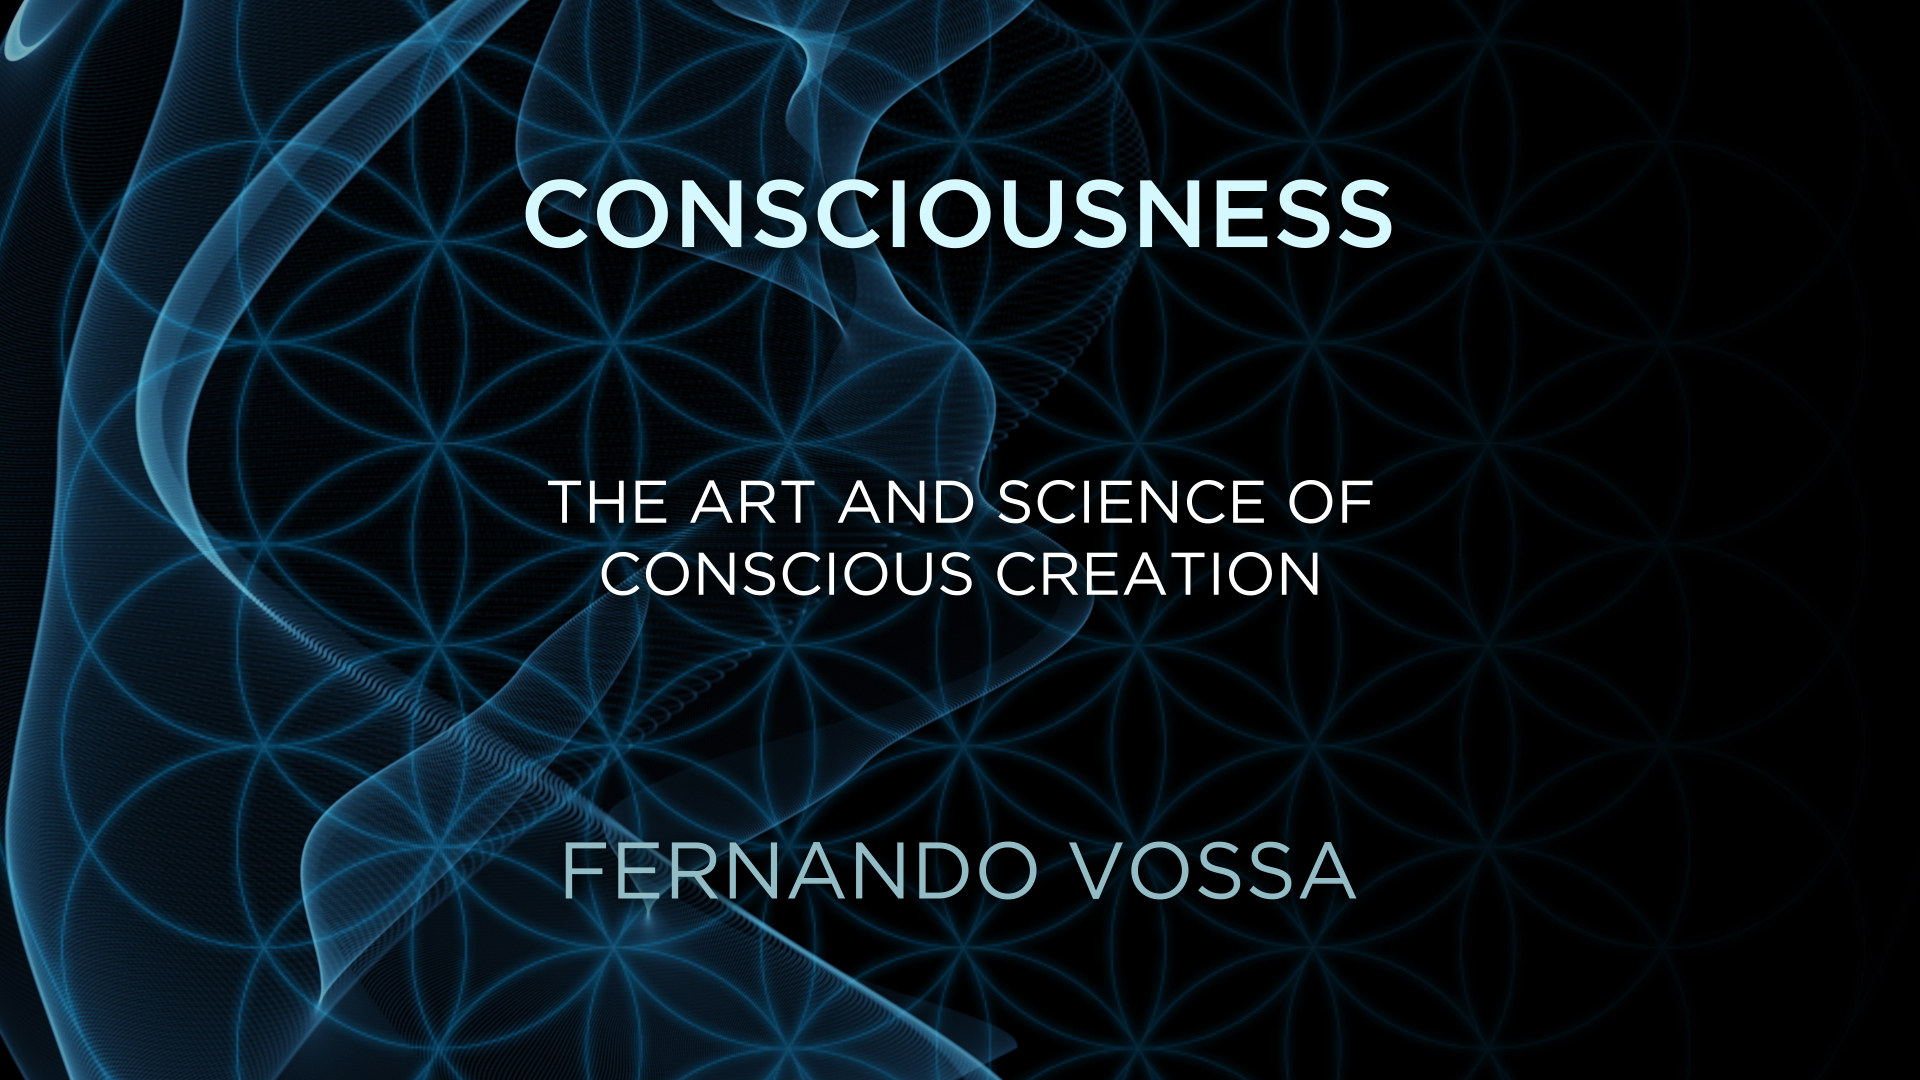 Fernando Vossa – The Art and Science of Conscious Creation